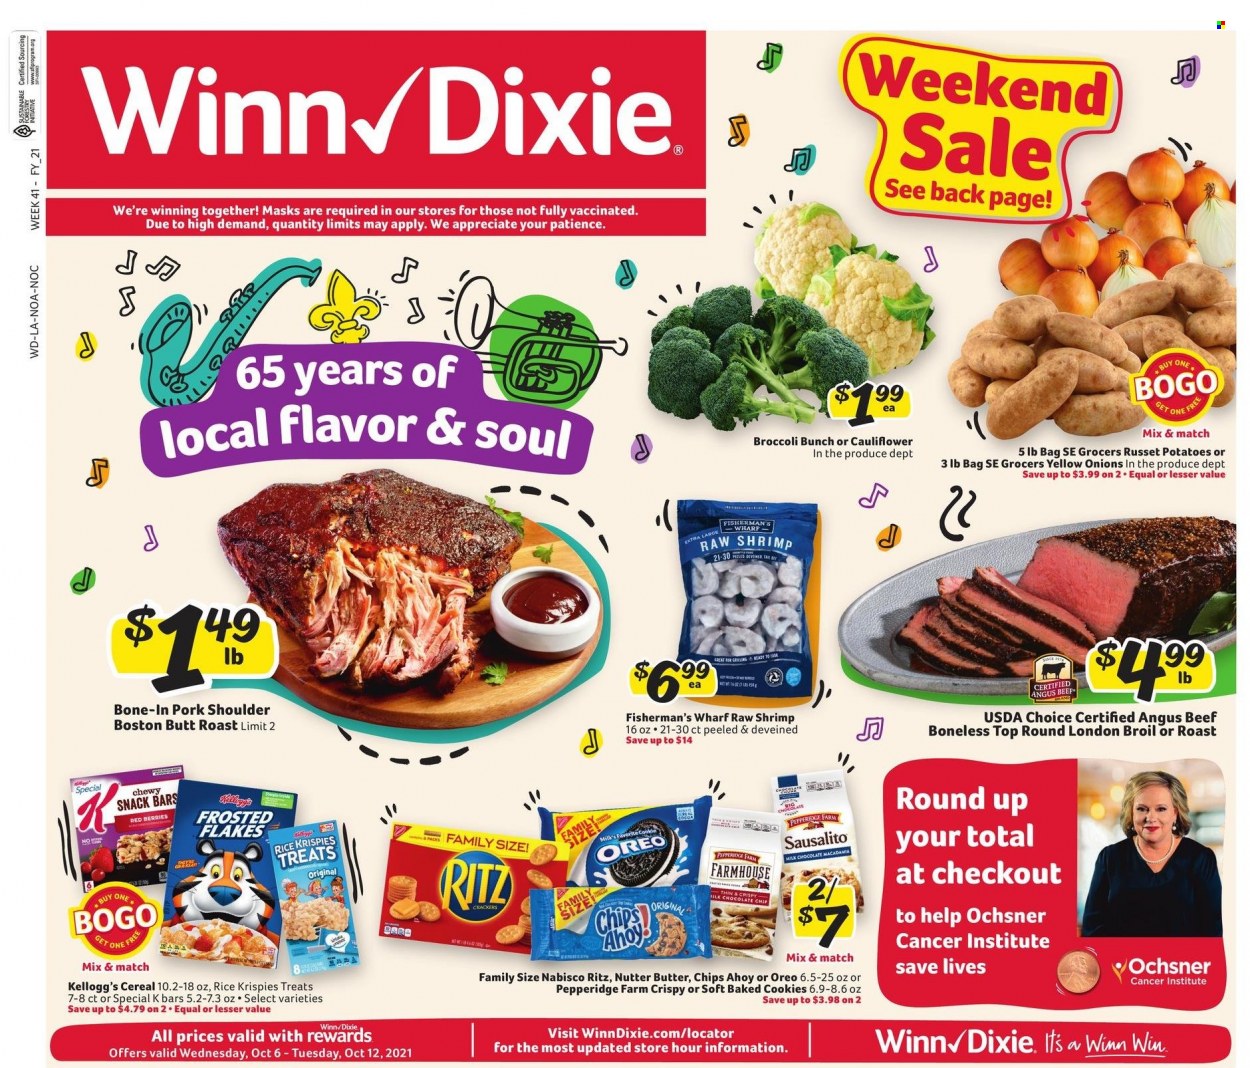 thumbnail - Winn Dixie Flyer - 10/06/2021 - 10/12/2021 - Sales products - broccoli, russet potatoes, potatoes, onion, shrimps, Oreo, butter, cookies, milk chocolate, snack, Kellogg's, snack bar, RITZ, chips, cereals, Rice Krispies, Frosted Flakes, beef meat, pork meat, pork shoulder. Page 1.